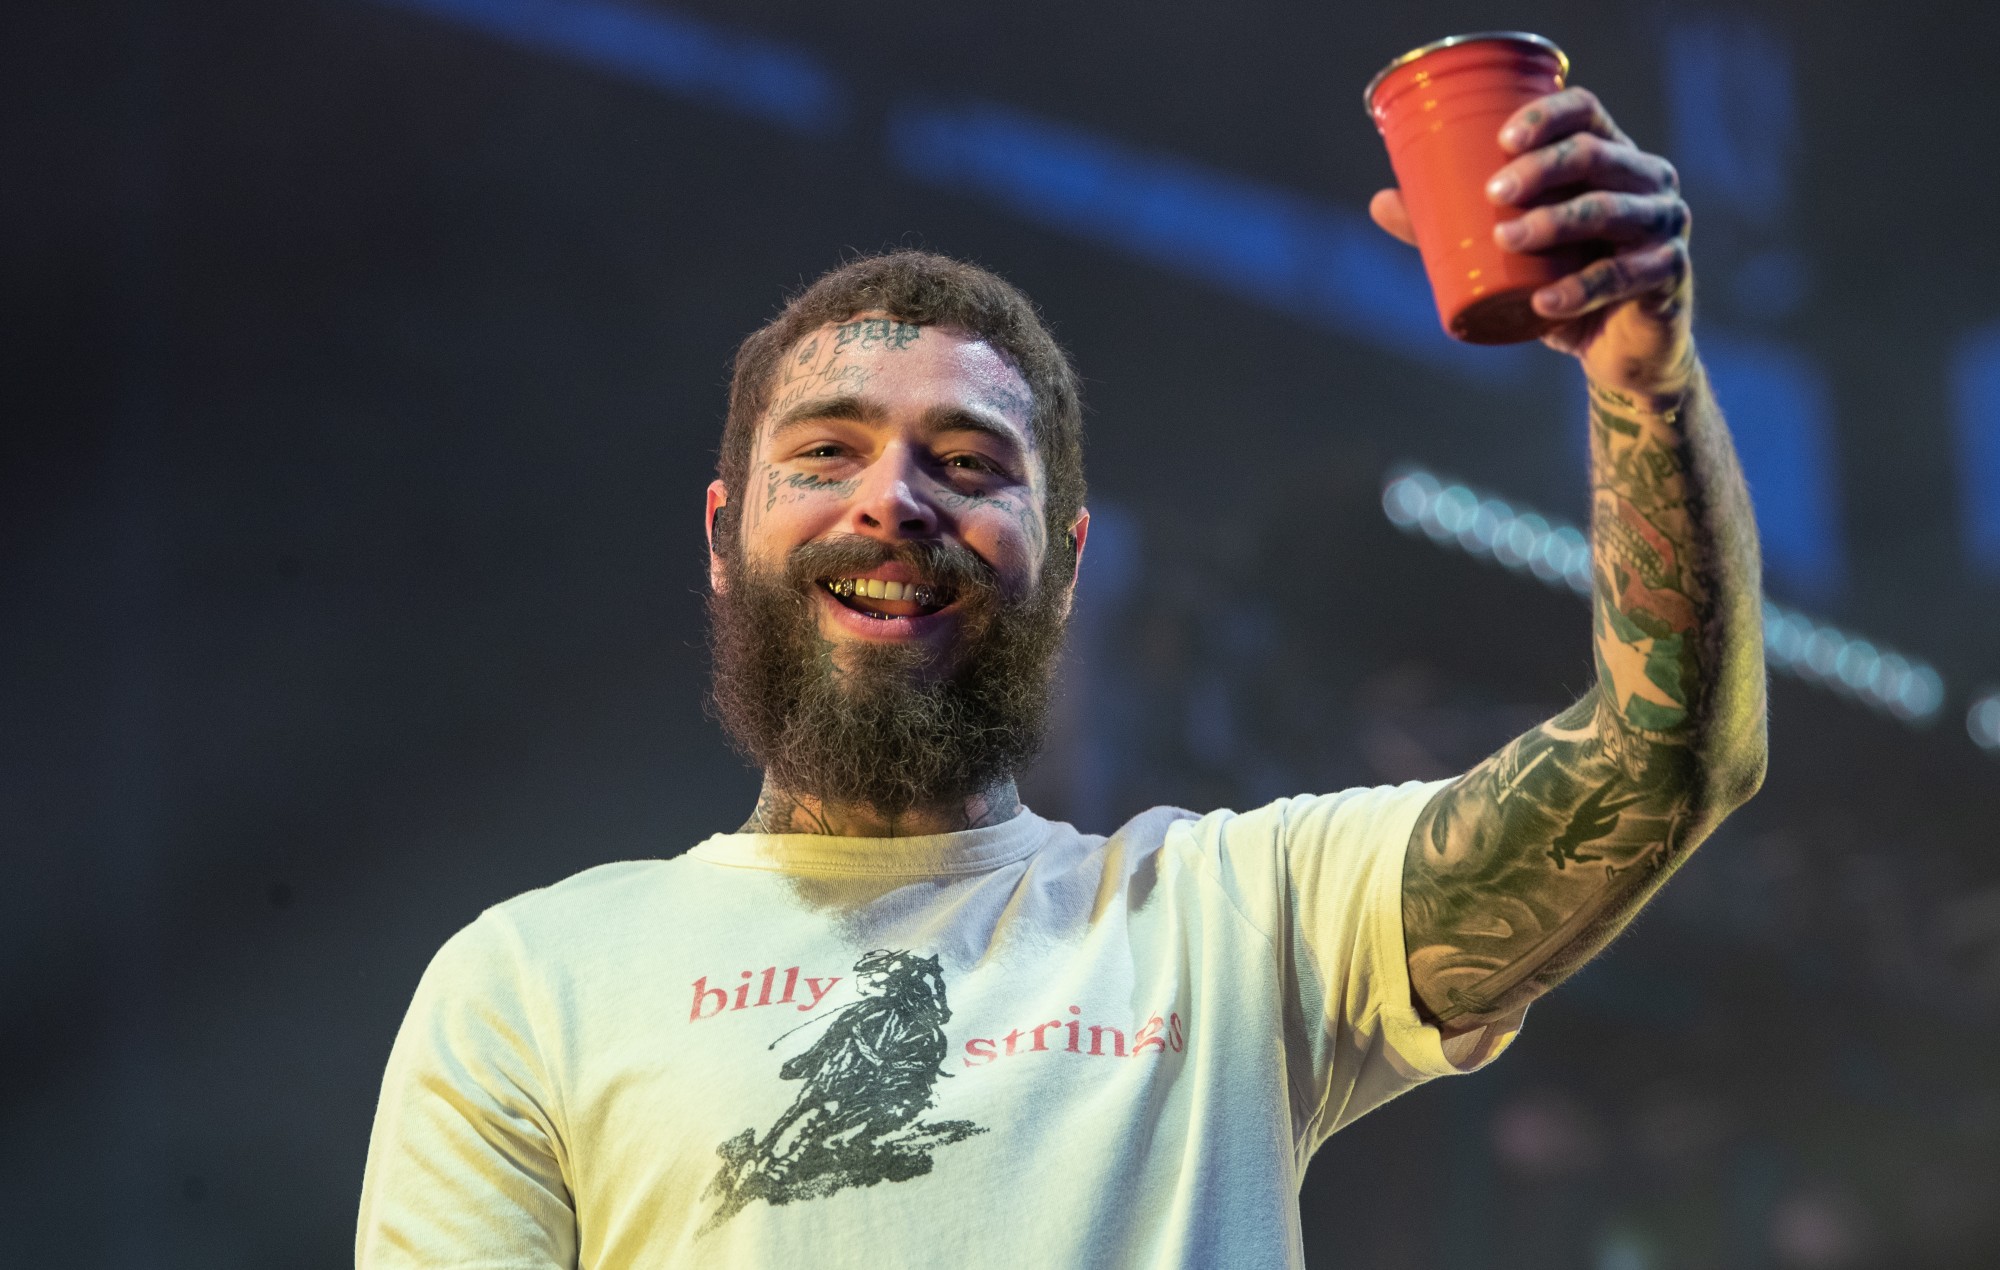 Post Malone covers The Proclaimers and Sublime with New Zealand bar band